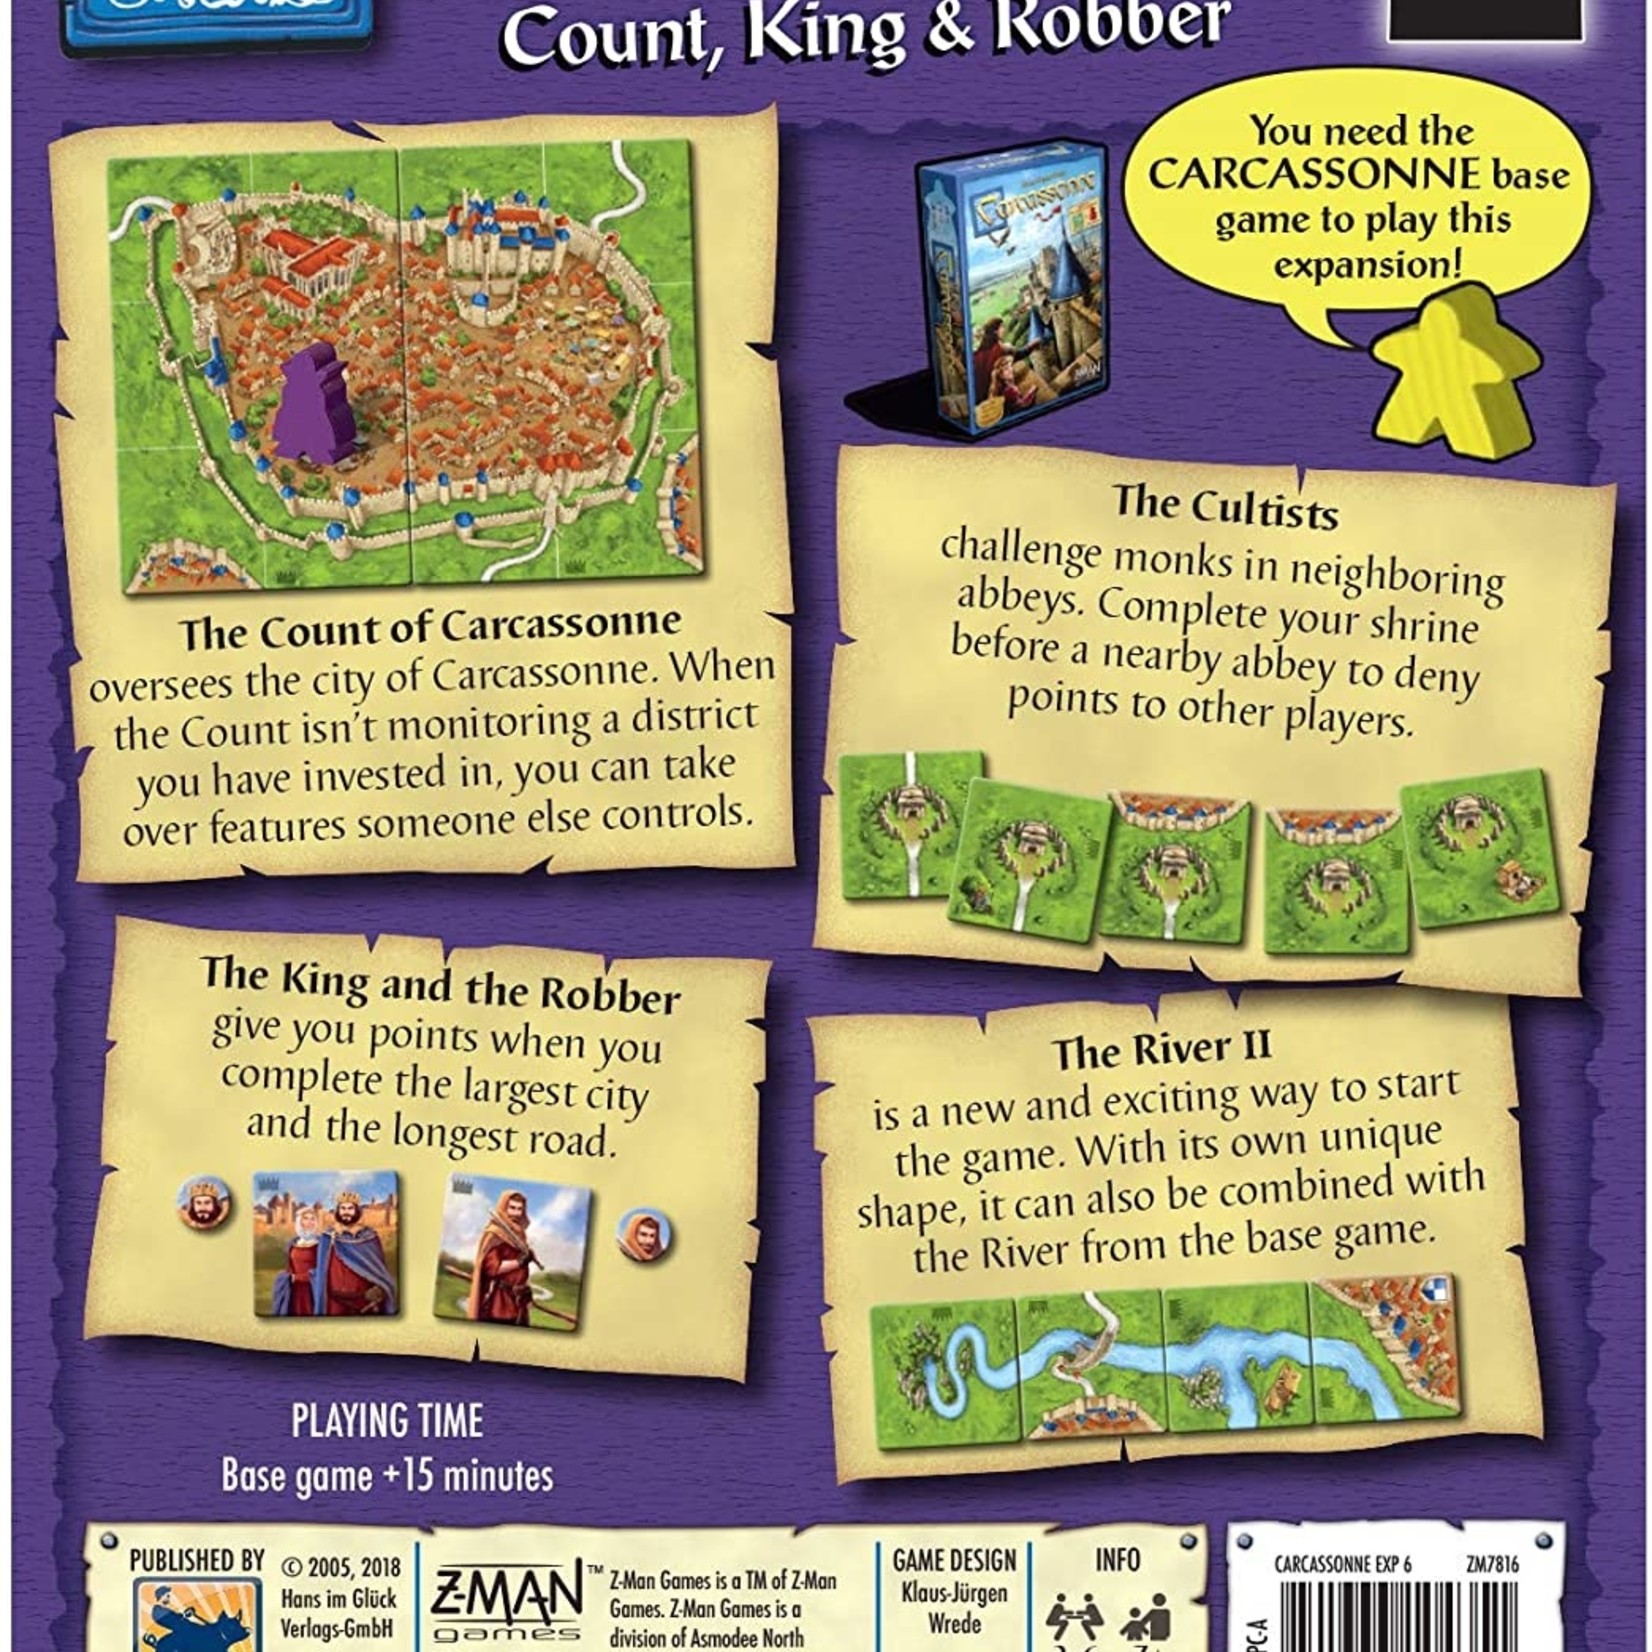 Z-Man Games Carcassonne Expansion 6 Count, King and Robber